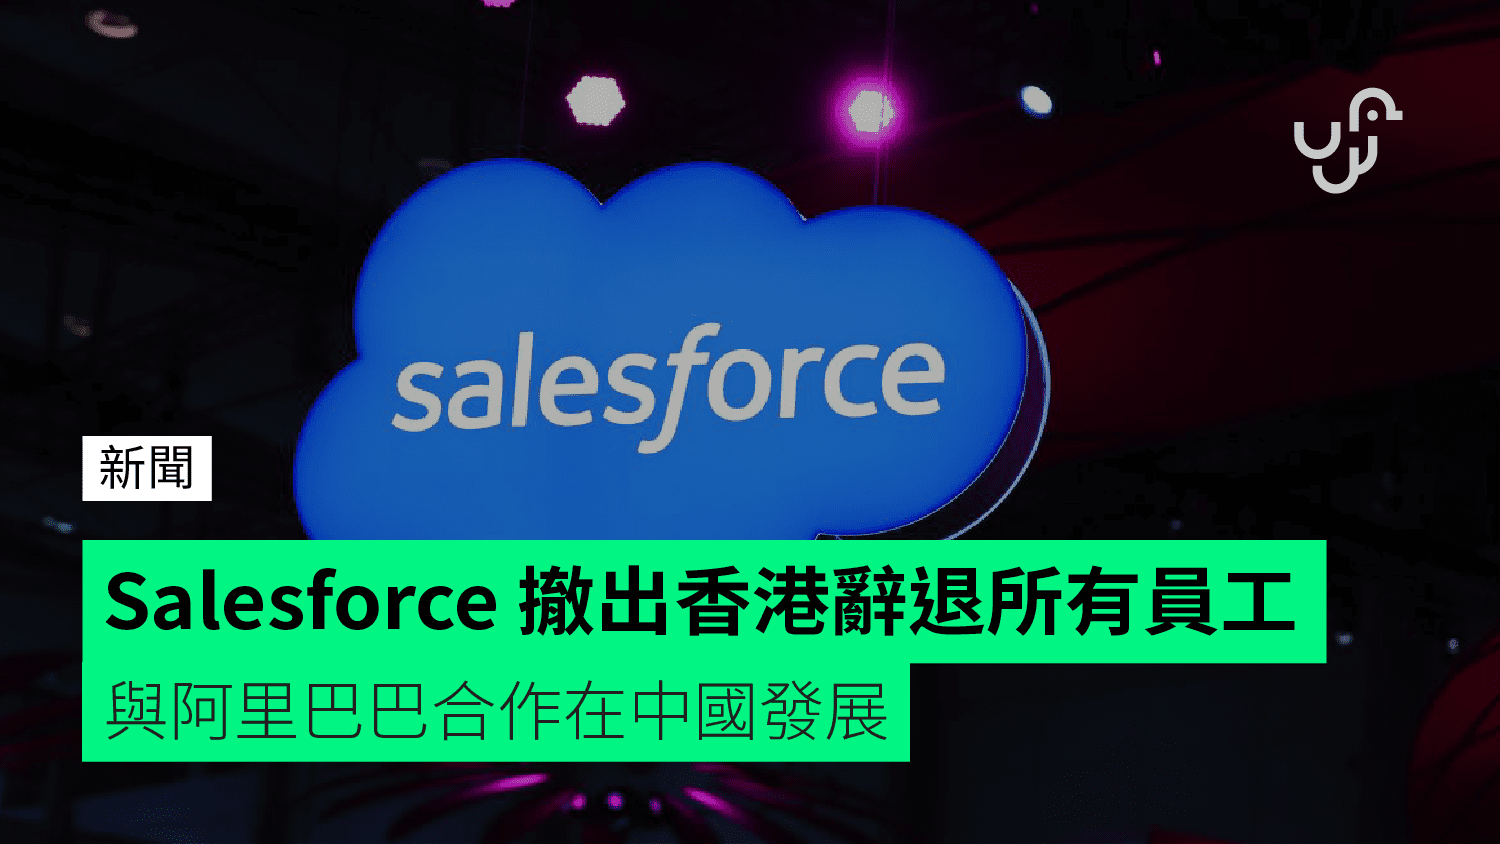 Salesforce withdraws from Hong Kong, lays off all employees, cooperates with Alibaba to…